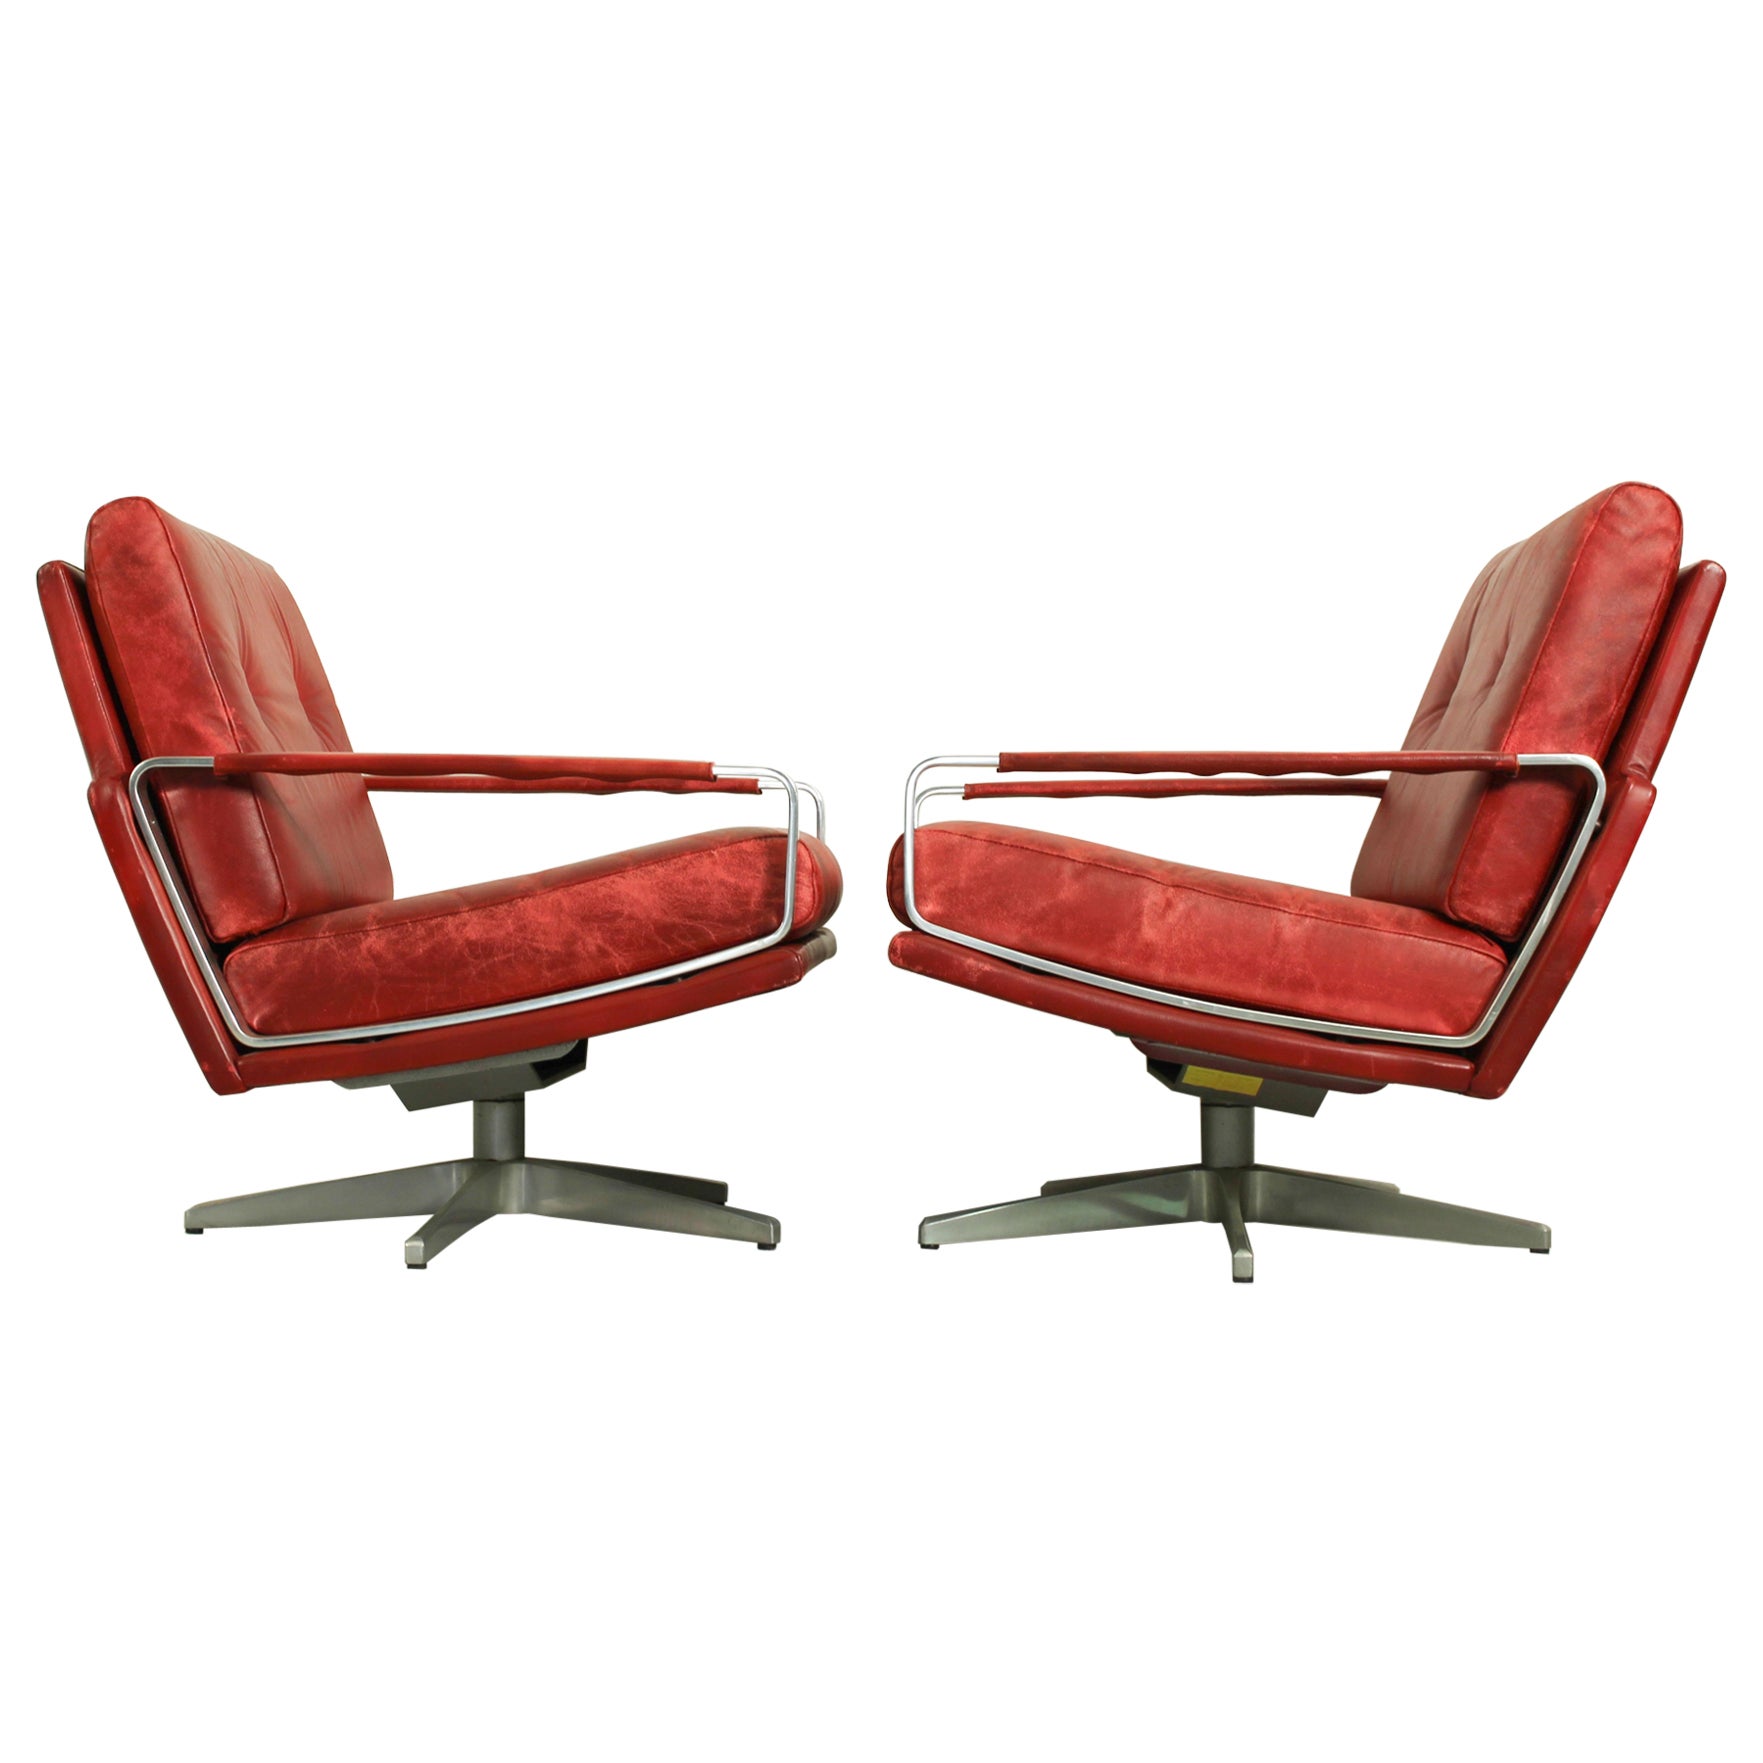 Pair of Stylish Mid Century Swivel Lounge chairs, Germany 1960s